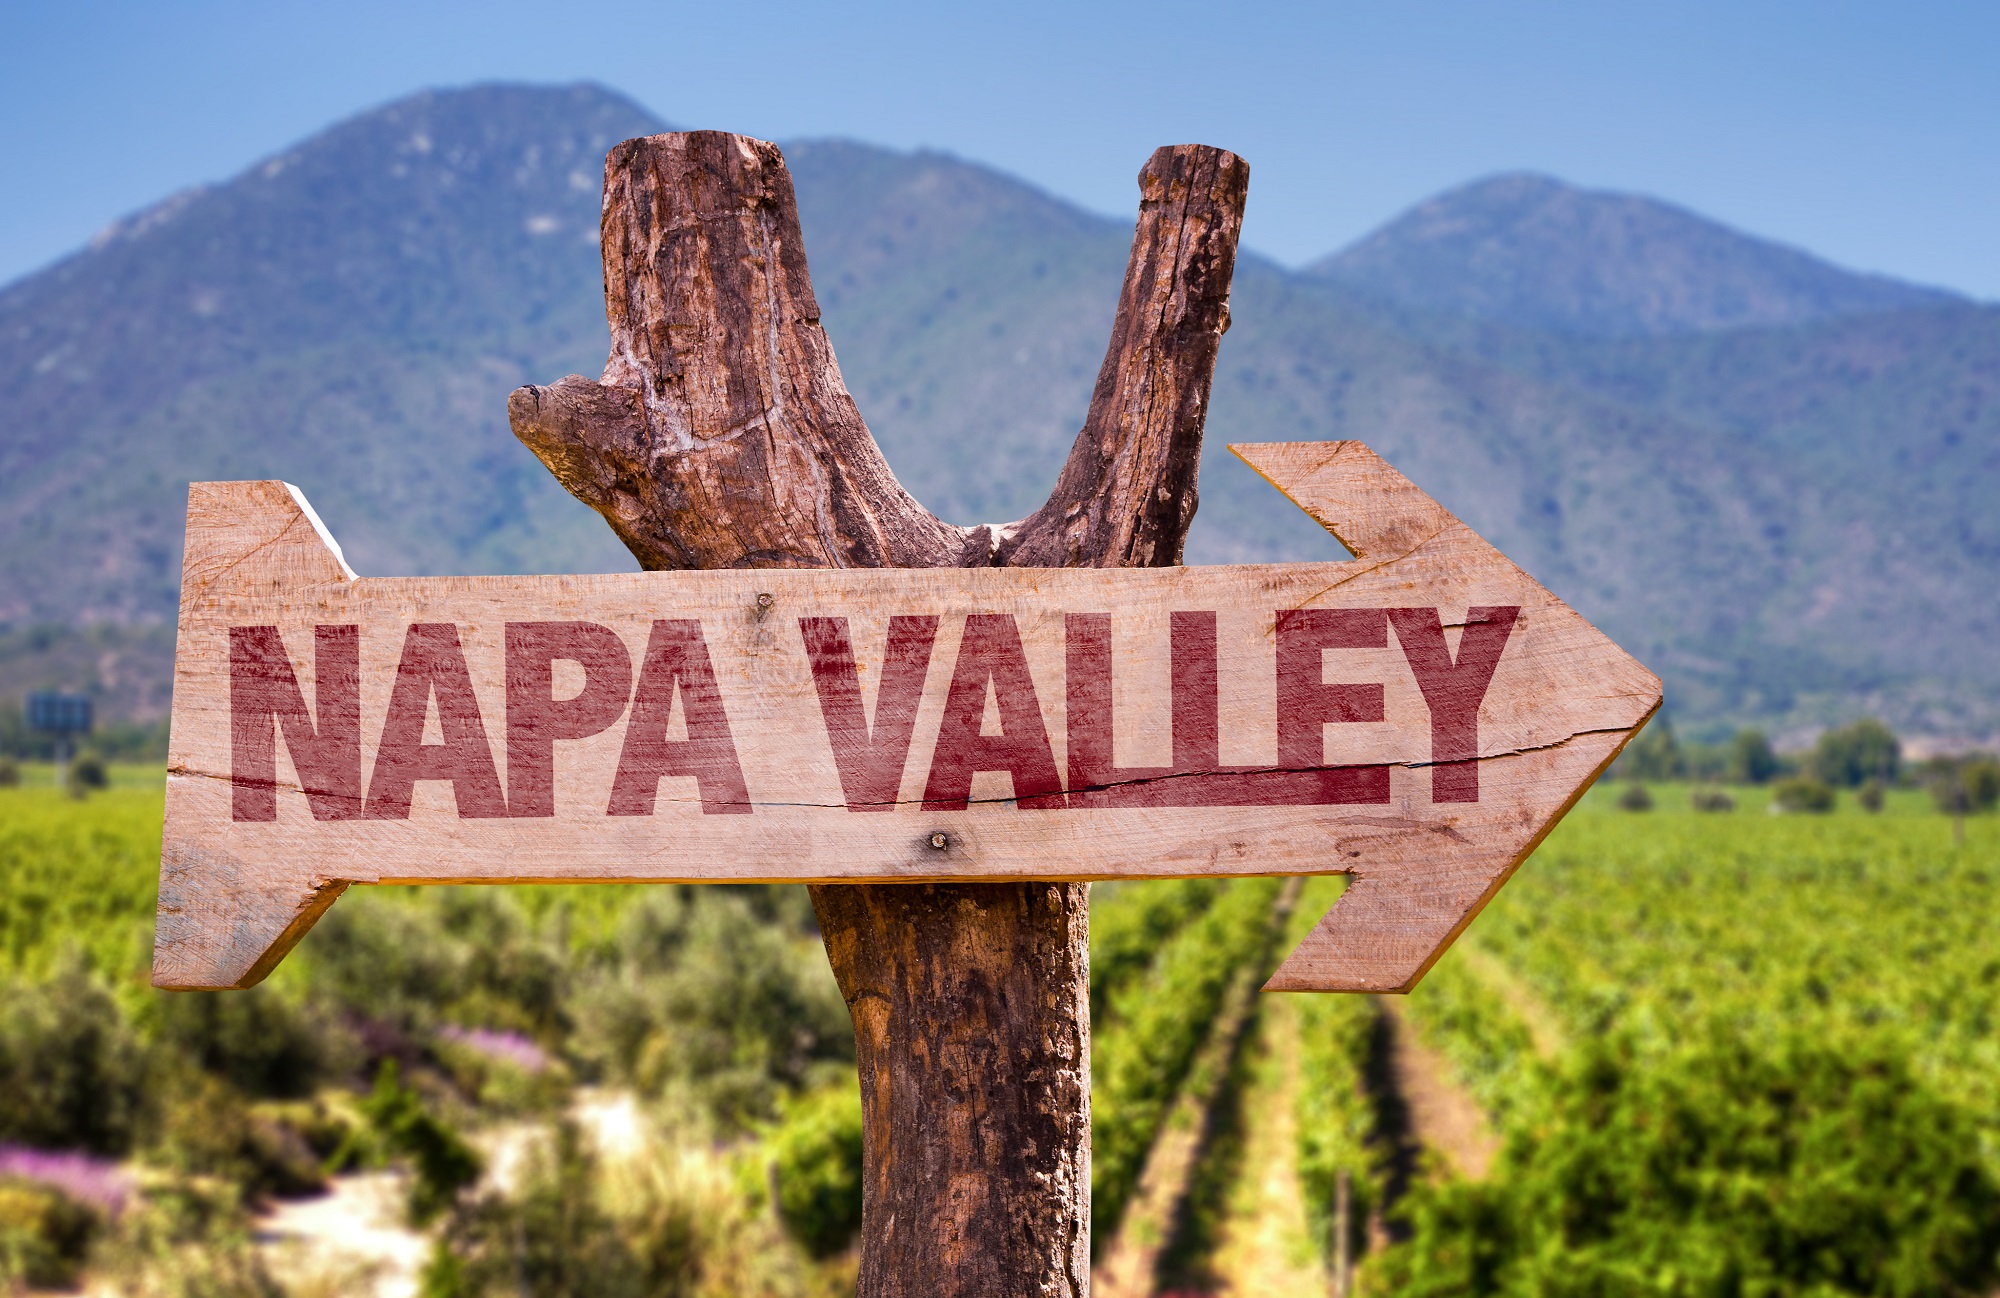 The wines of Napa Valley in California are considered some of the best in America